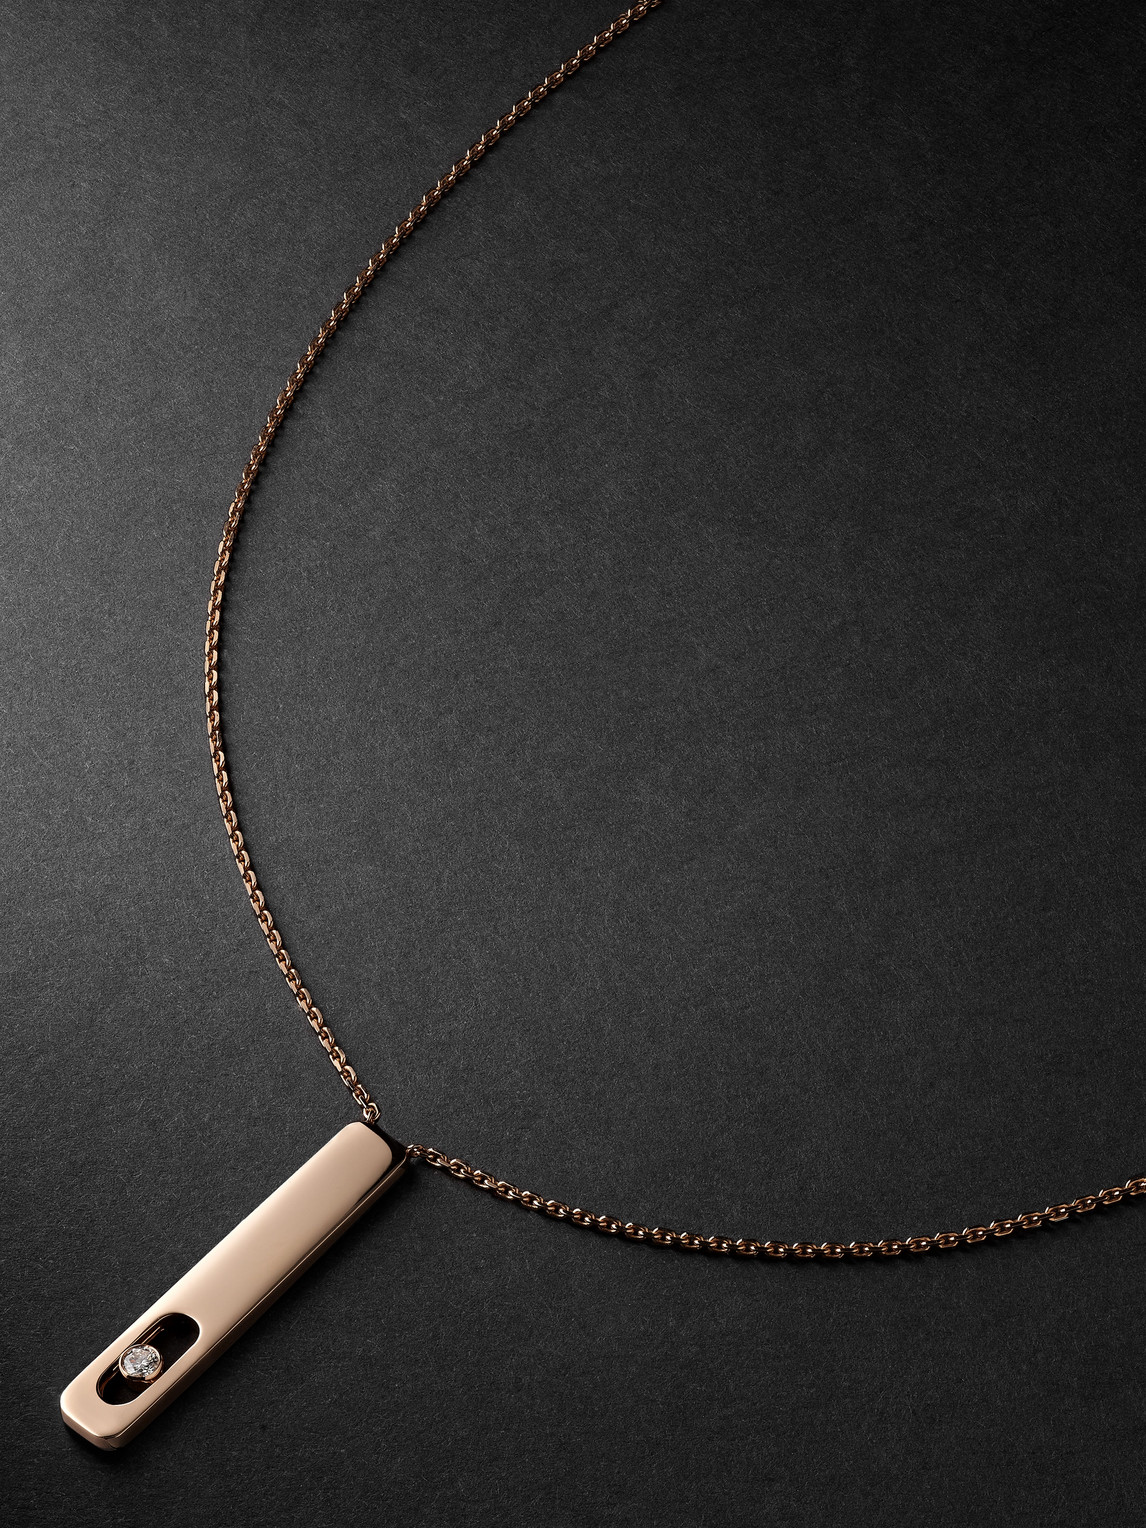 Messika - My First Diamond Rose Gold Necklace - Men - Rose gold von Messika